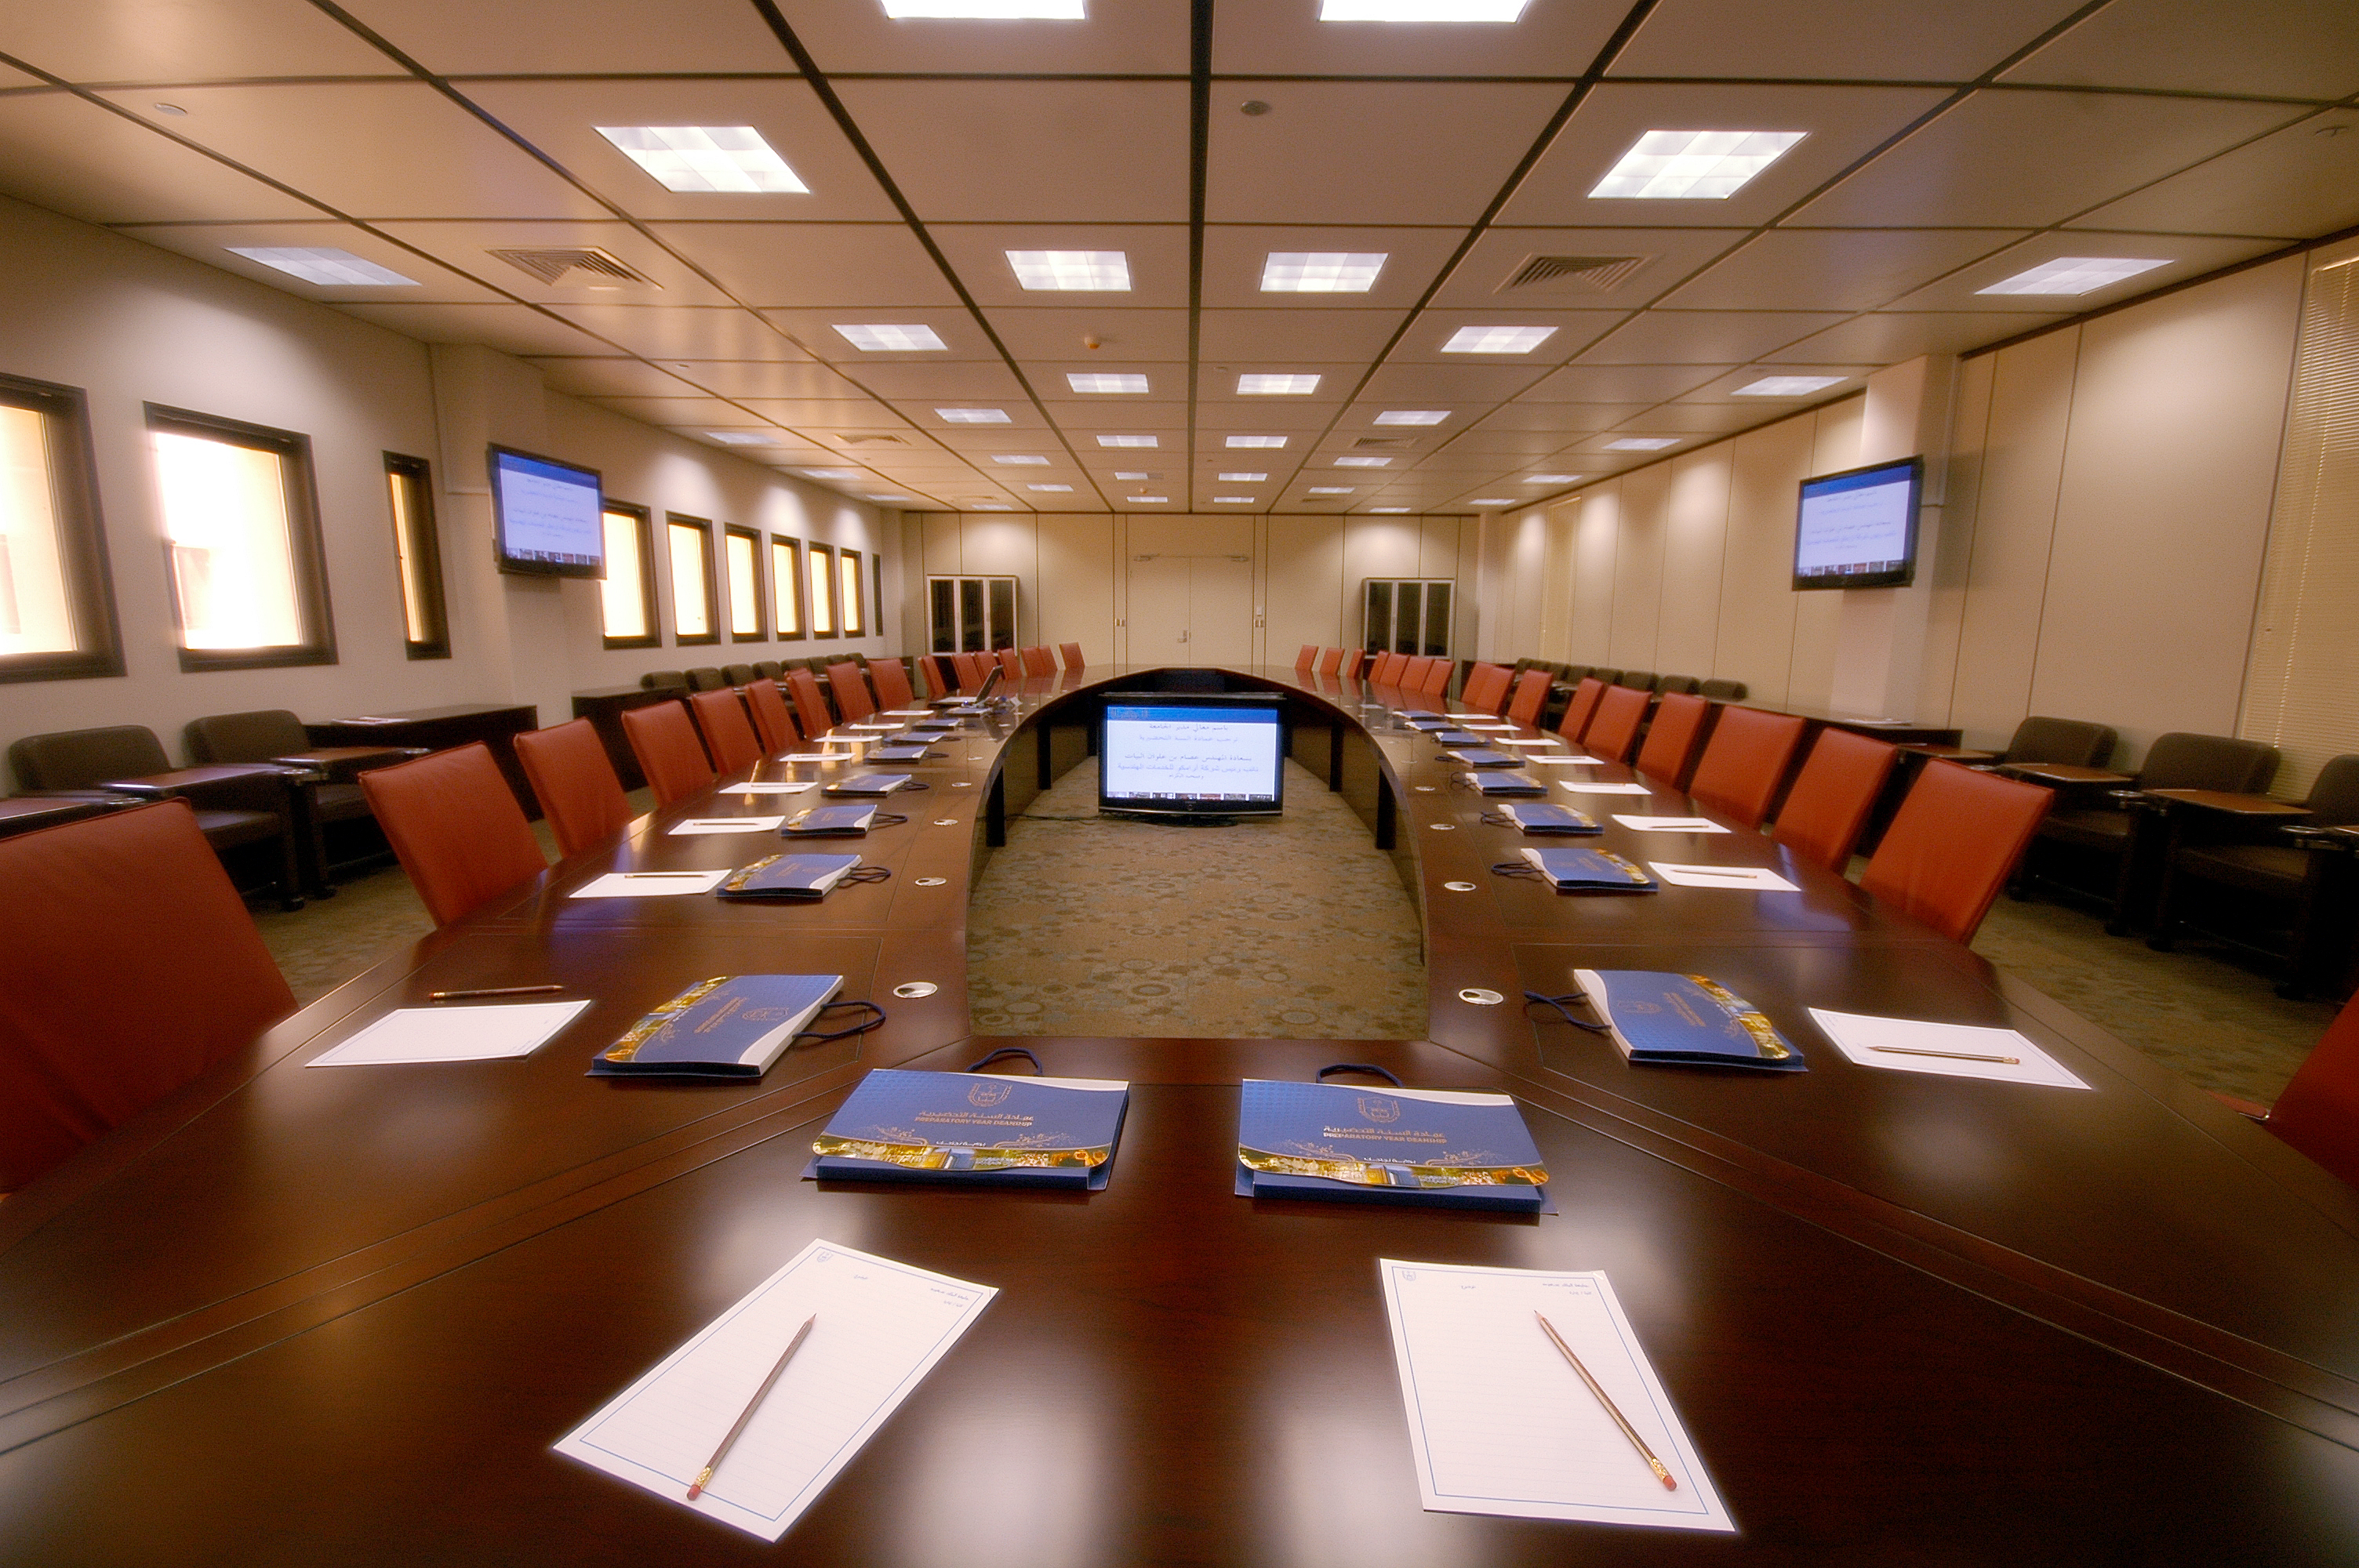 Large empty conference room with center computer, paper and pad at each seat